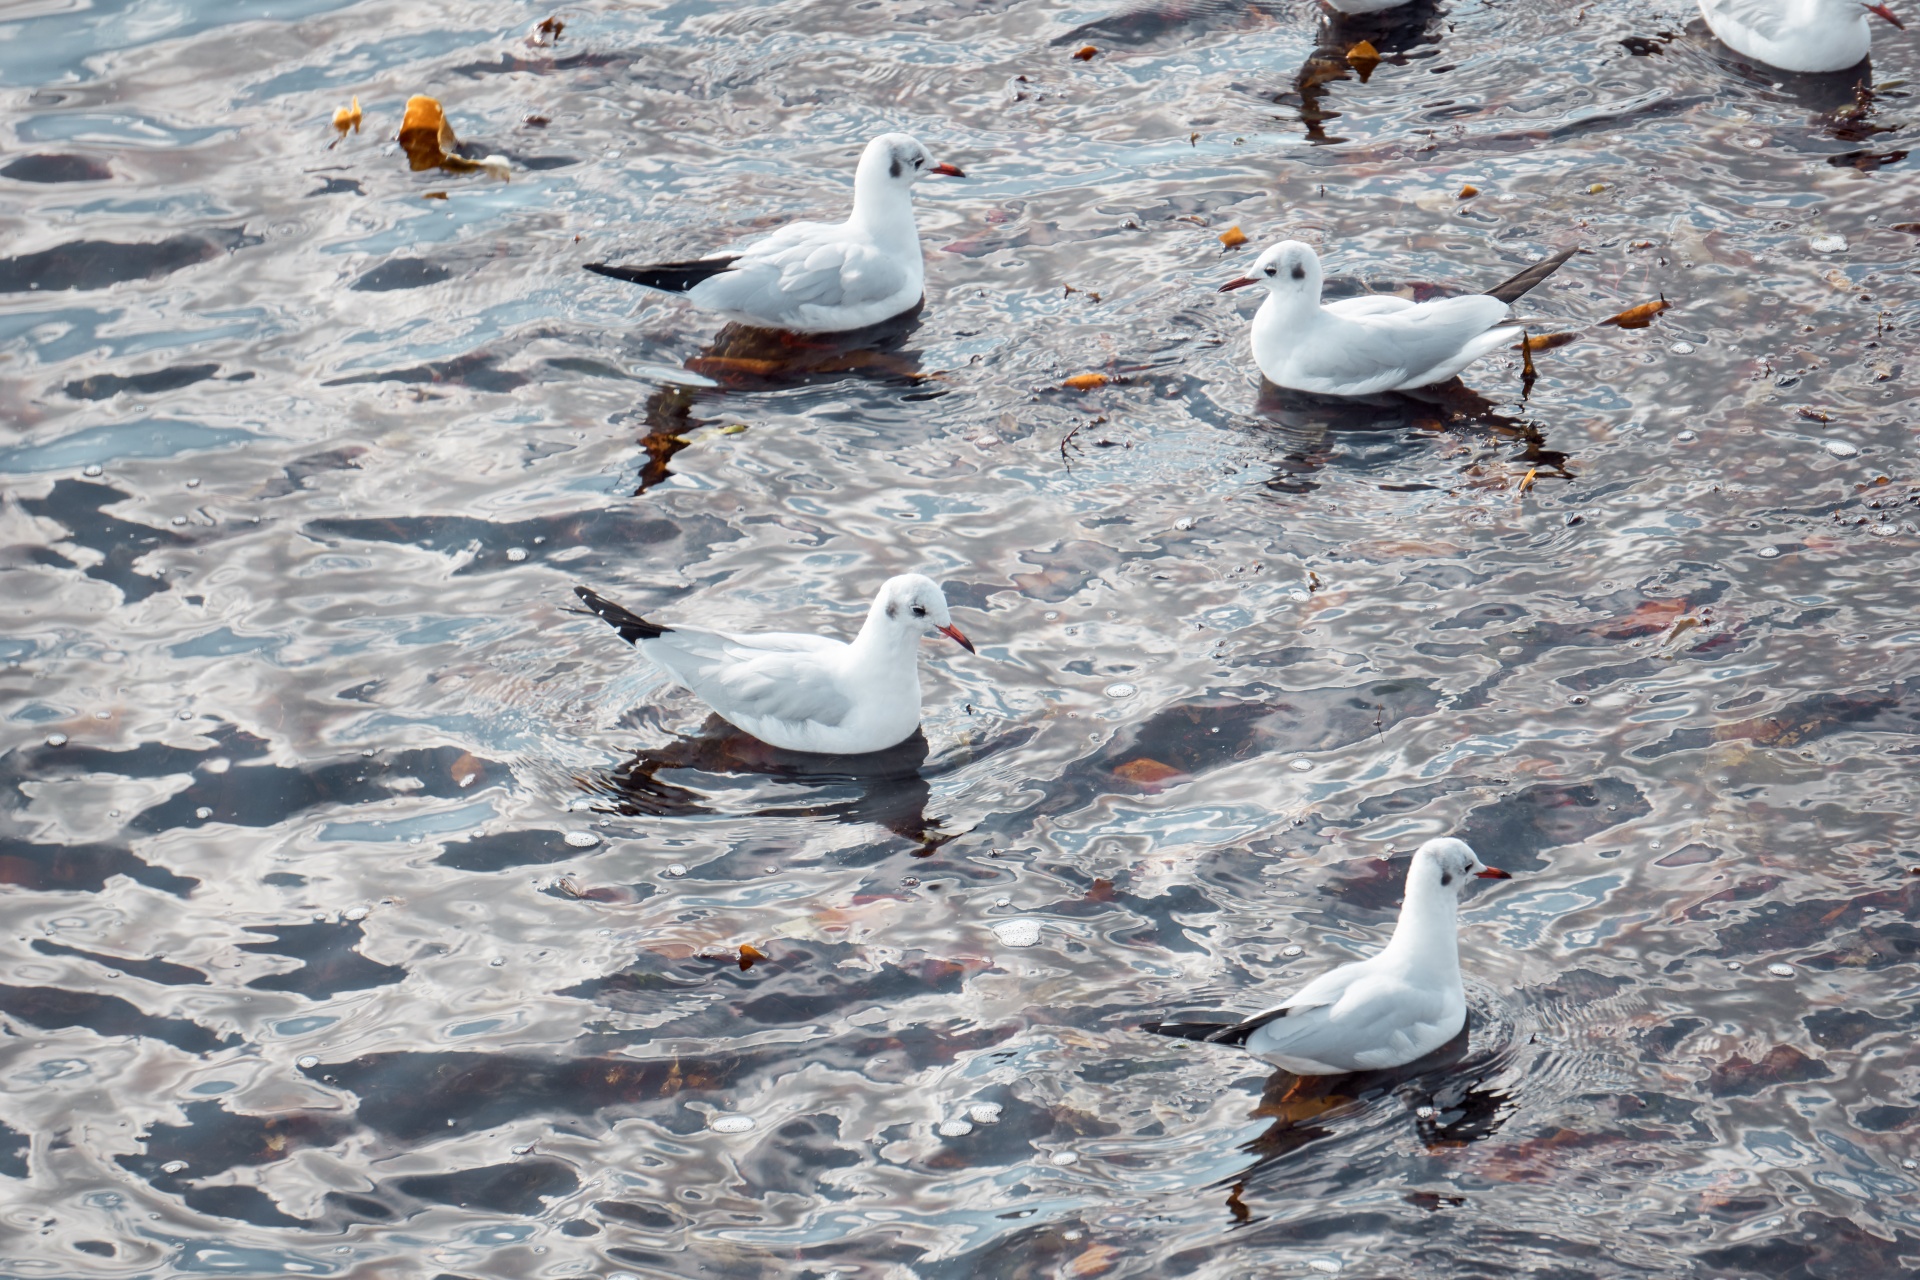 Group of seagulls on the water